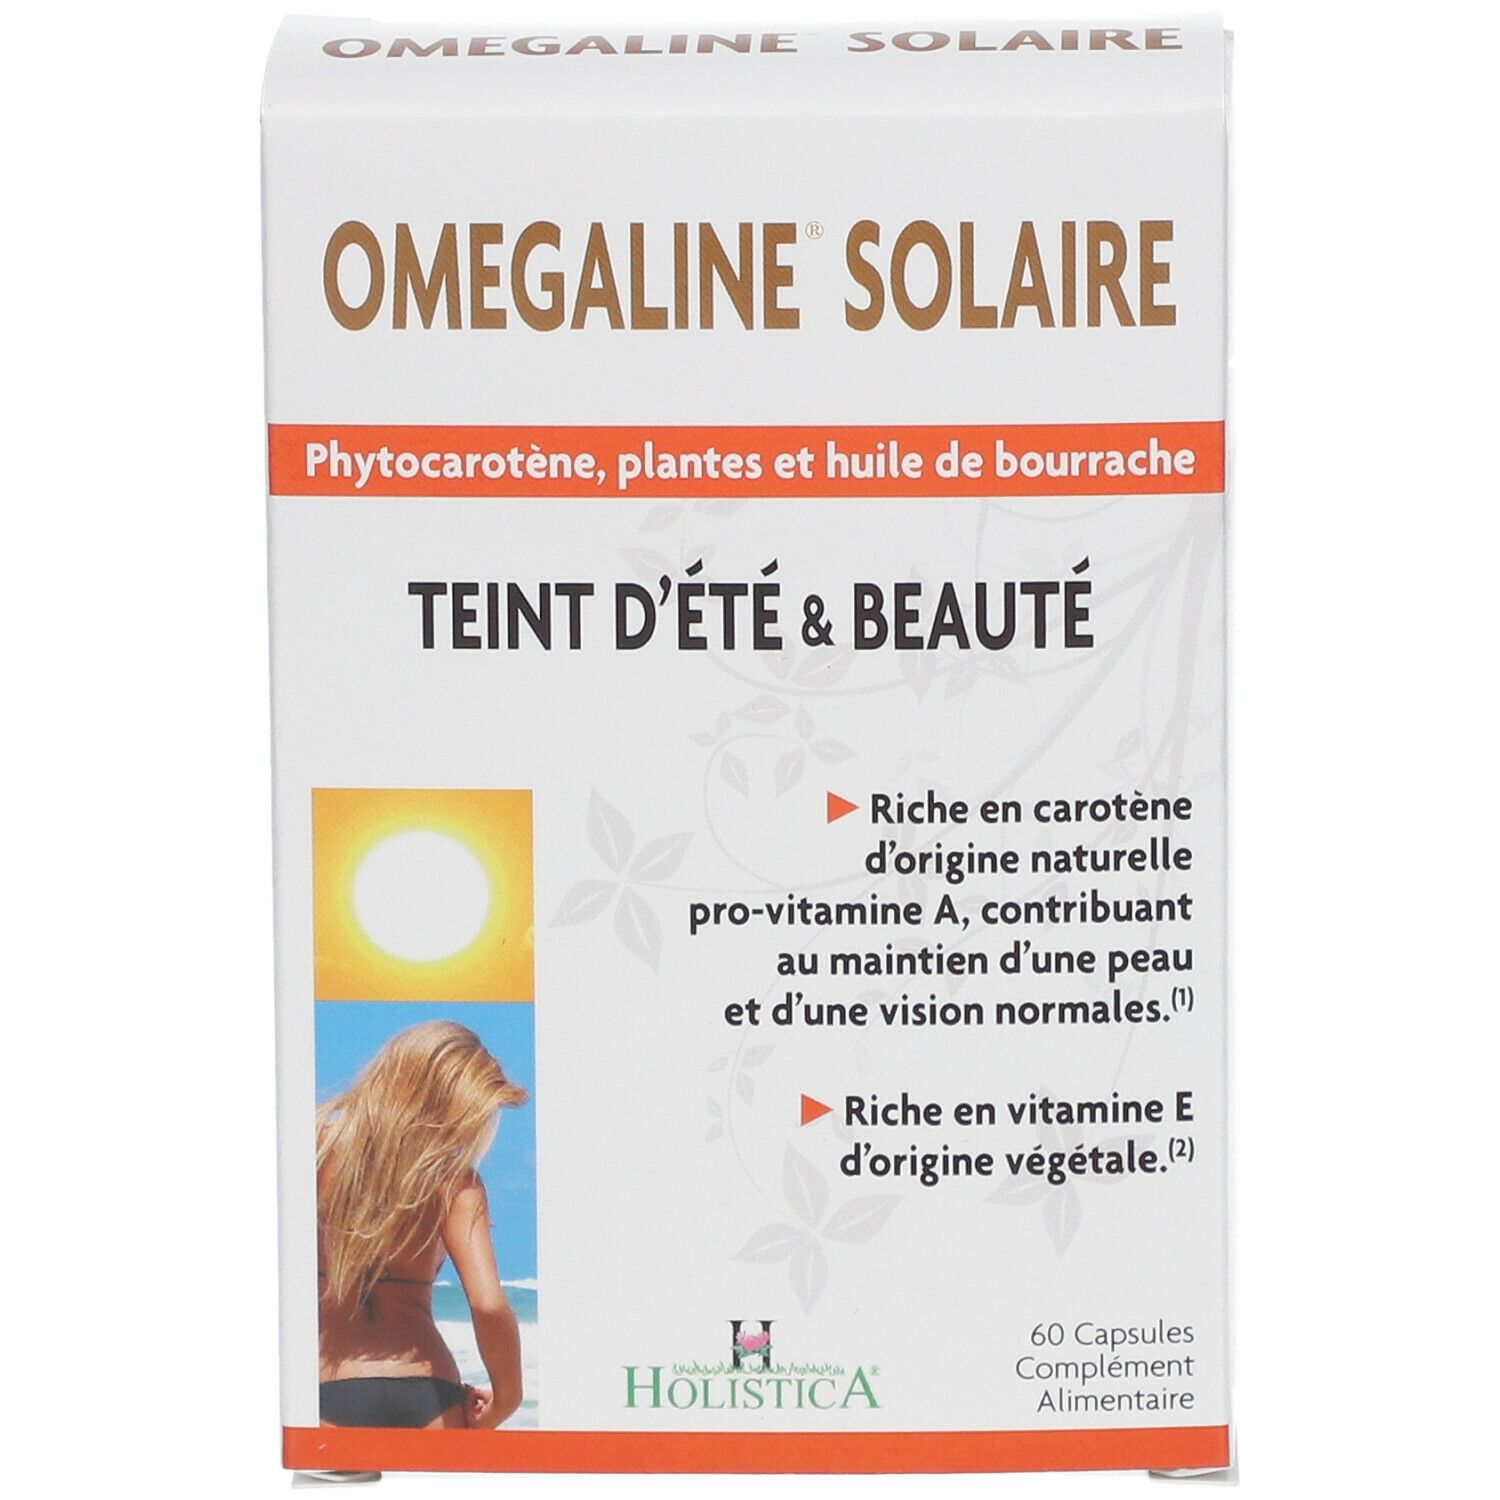 OMEGALINE® SOLAIRE